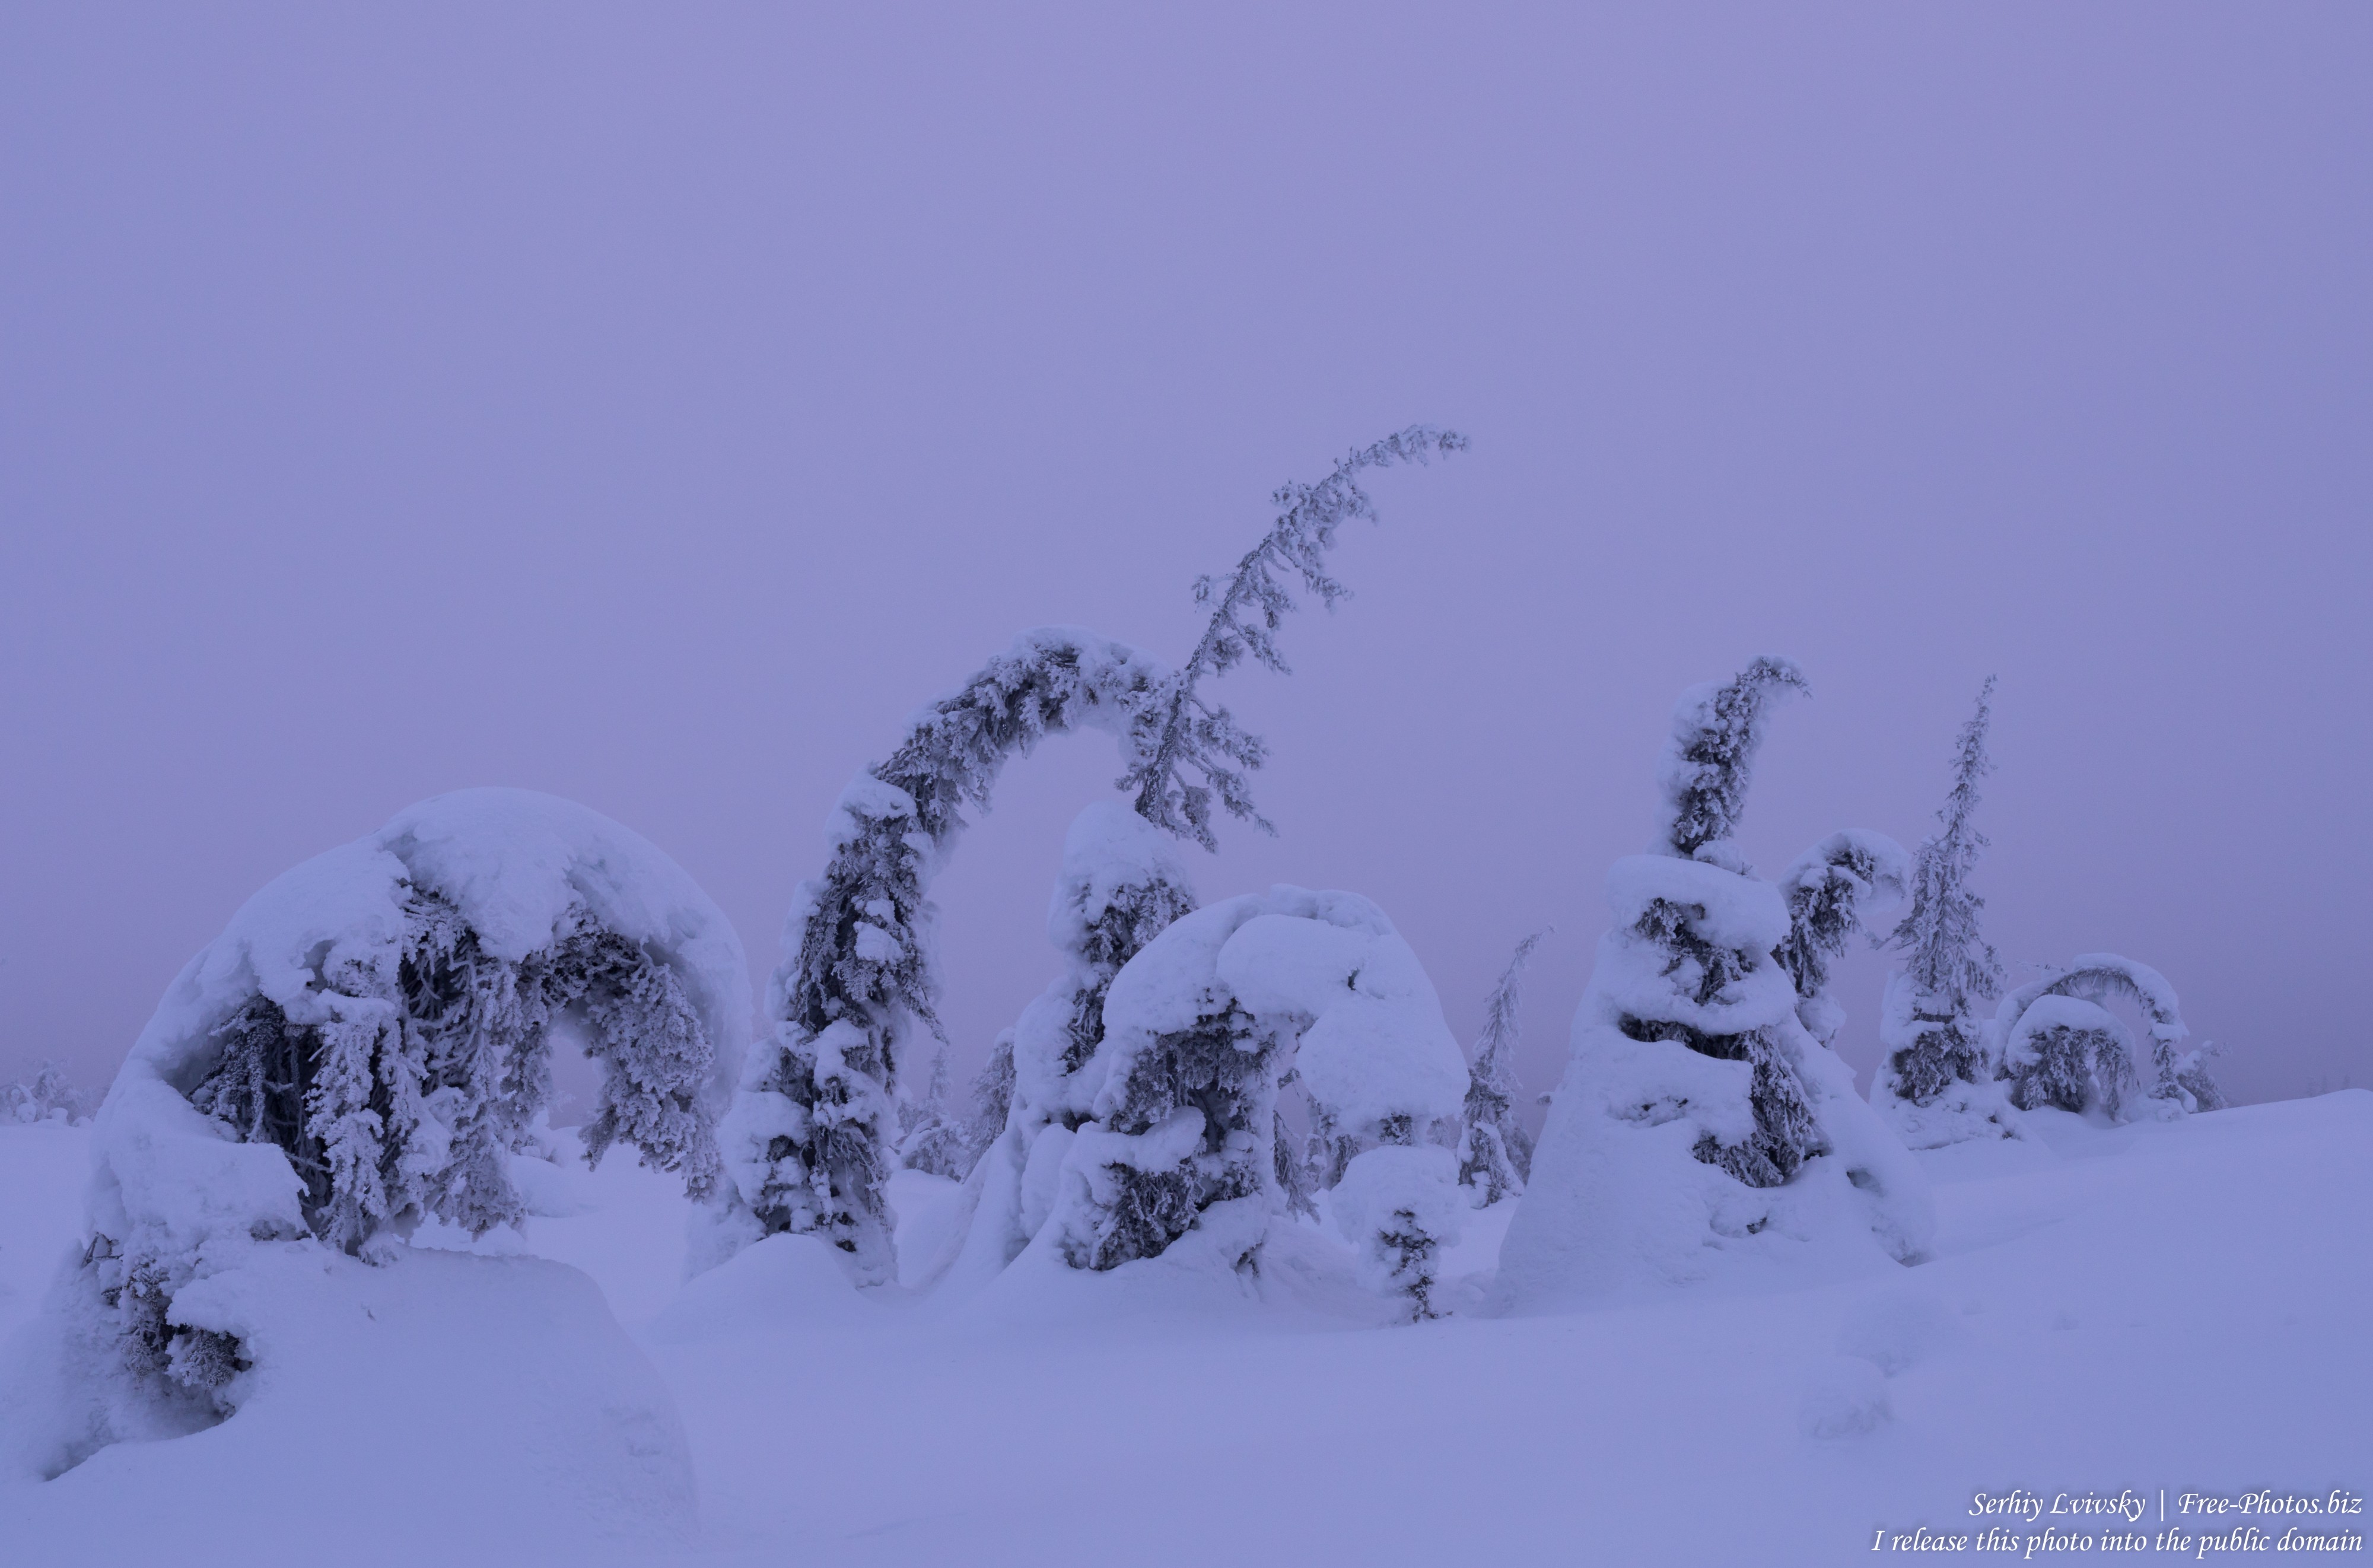 Riisitunturi, Finland, photographed in January 2020 by Serhiy Lvivsky, picture 1